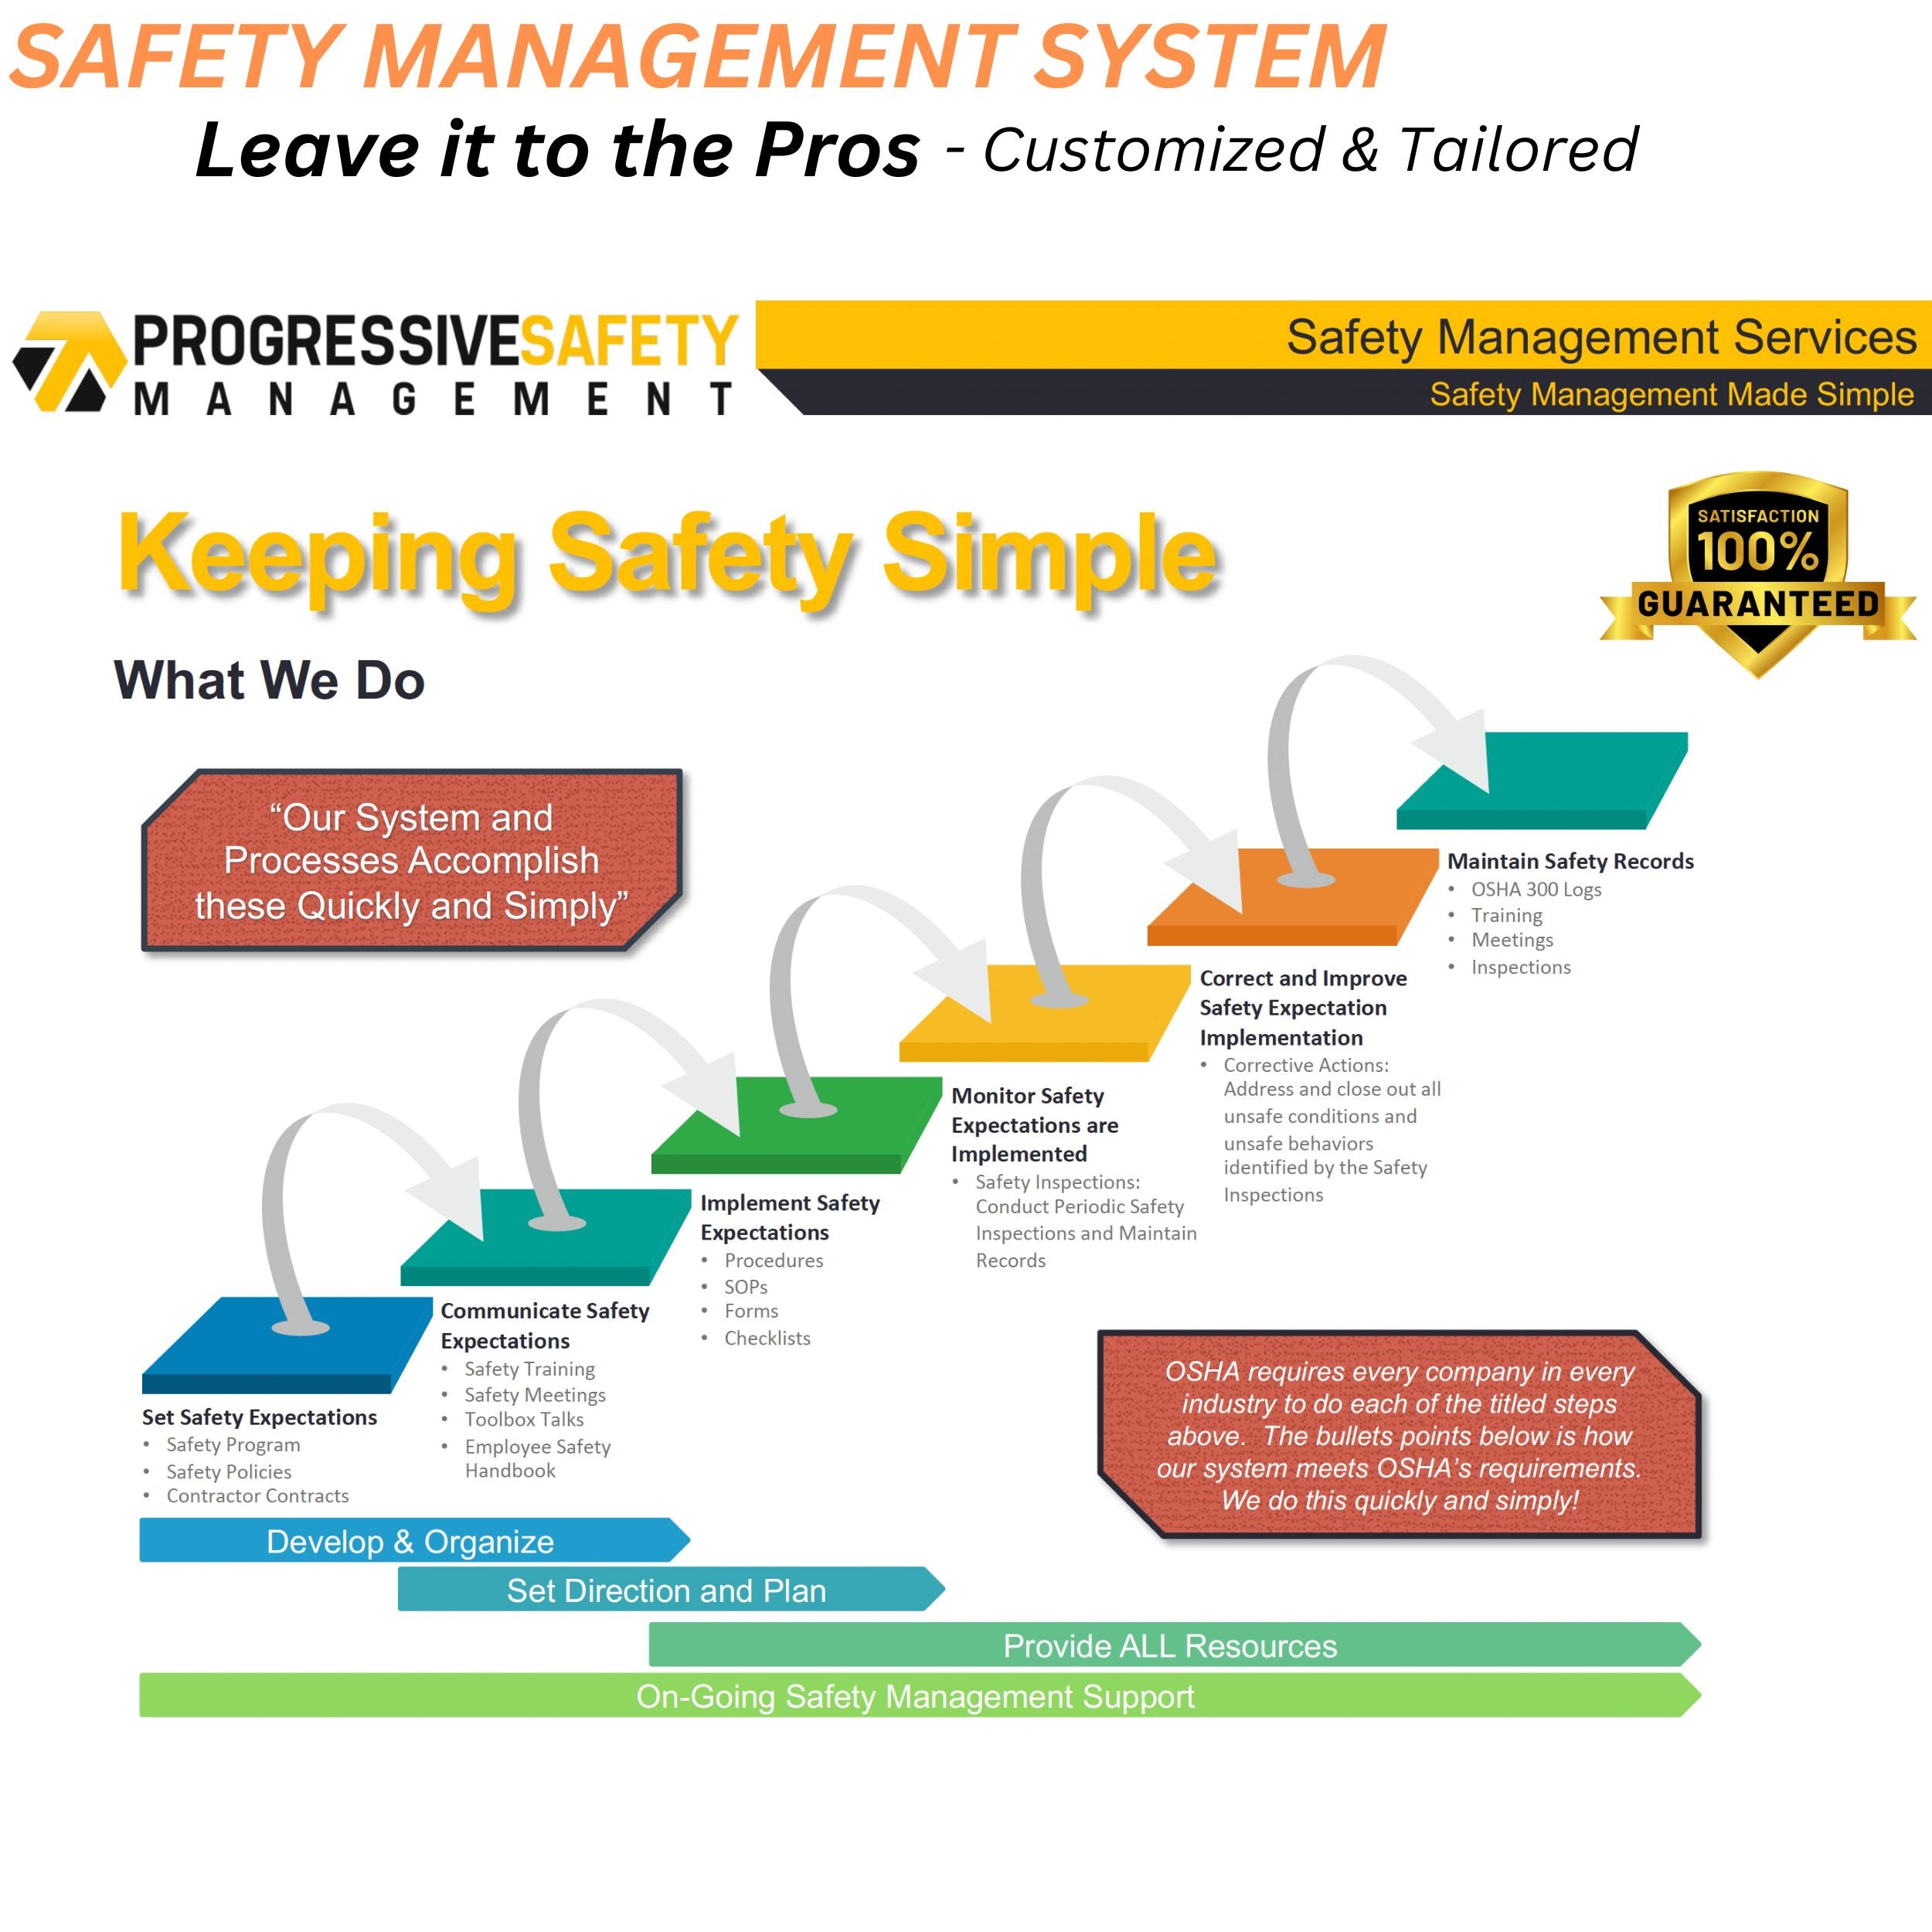 Company Safety Management System - Complete Package